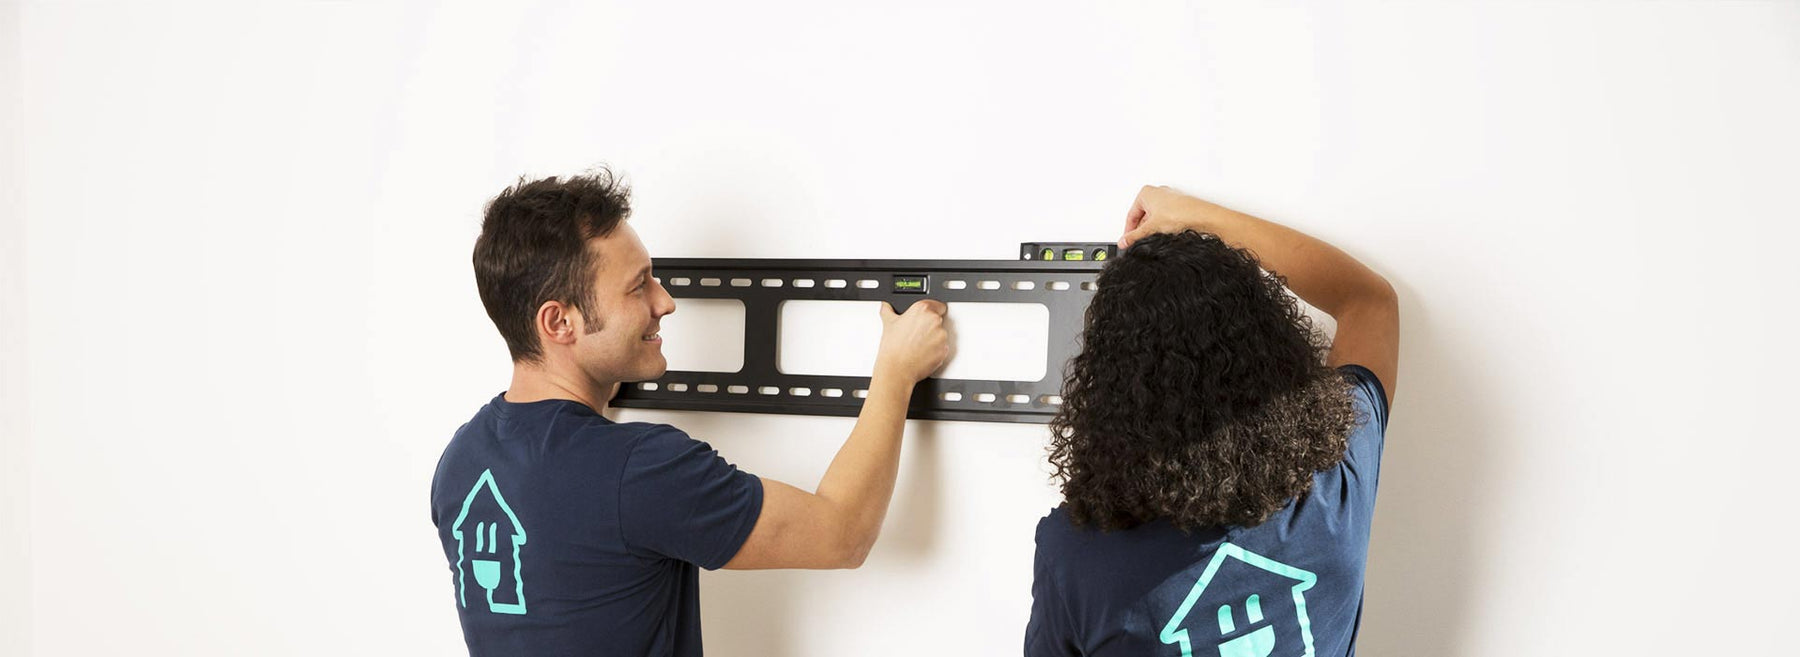 TV Wall Mount Installation. How You Should Do It.